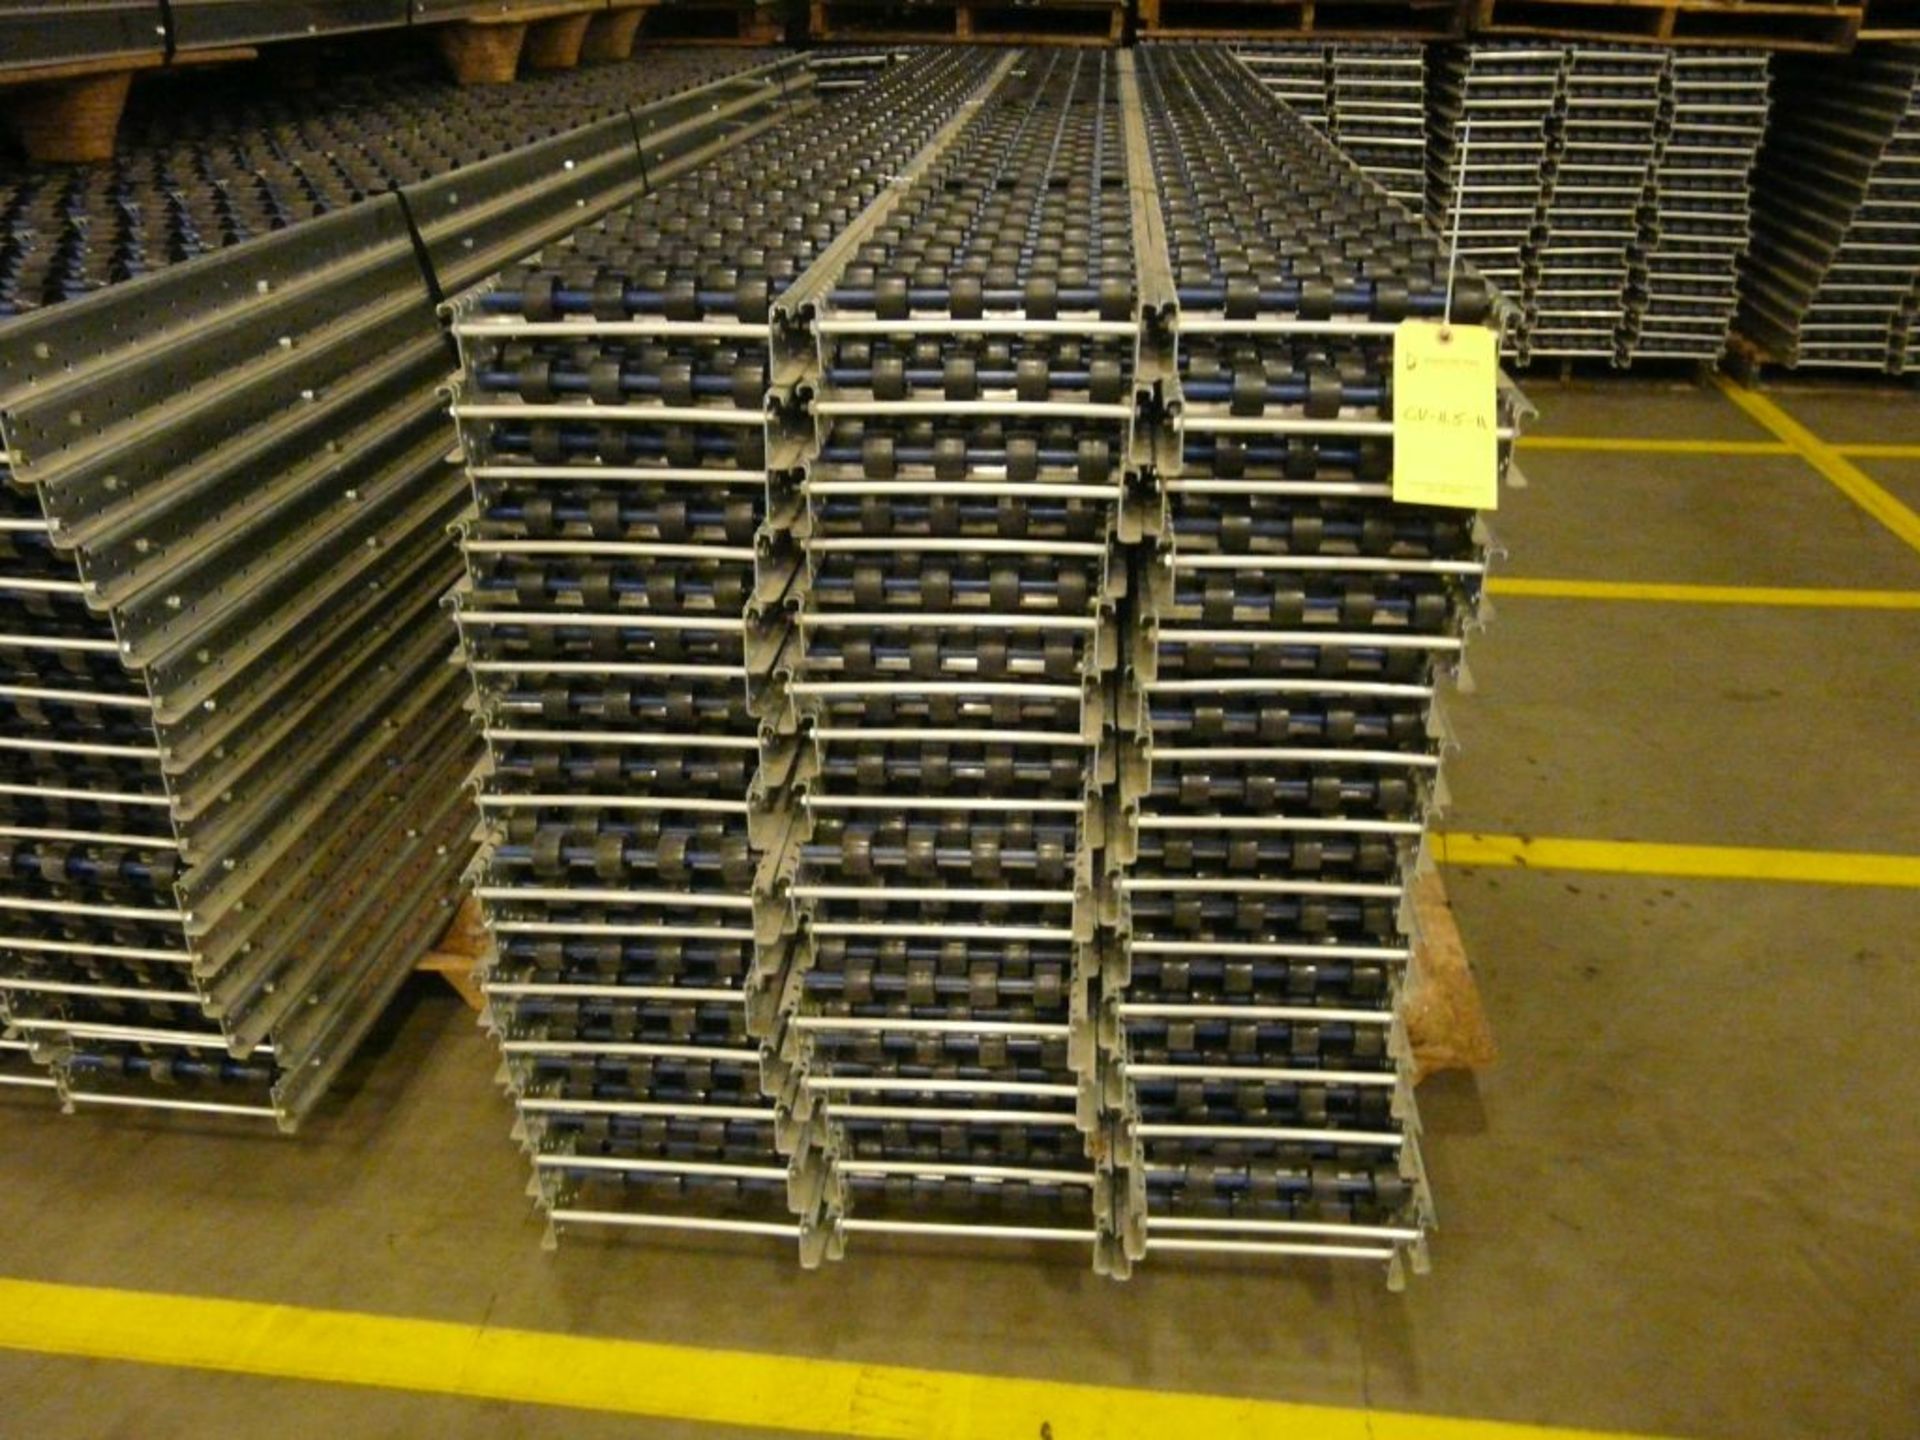 Lot of (90) SpanTrack Wheelbed Carton Flow Conveyors - 11.5'L x 11"W; Tag: 223568 - $30 Lot - Image 2 of 4